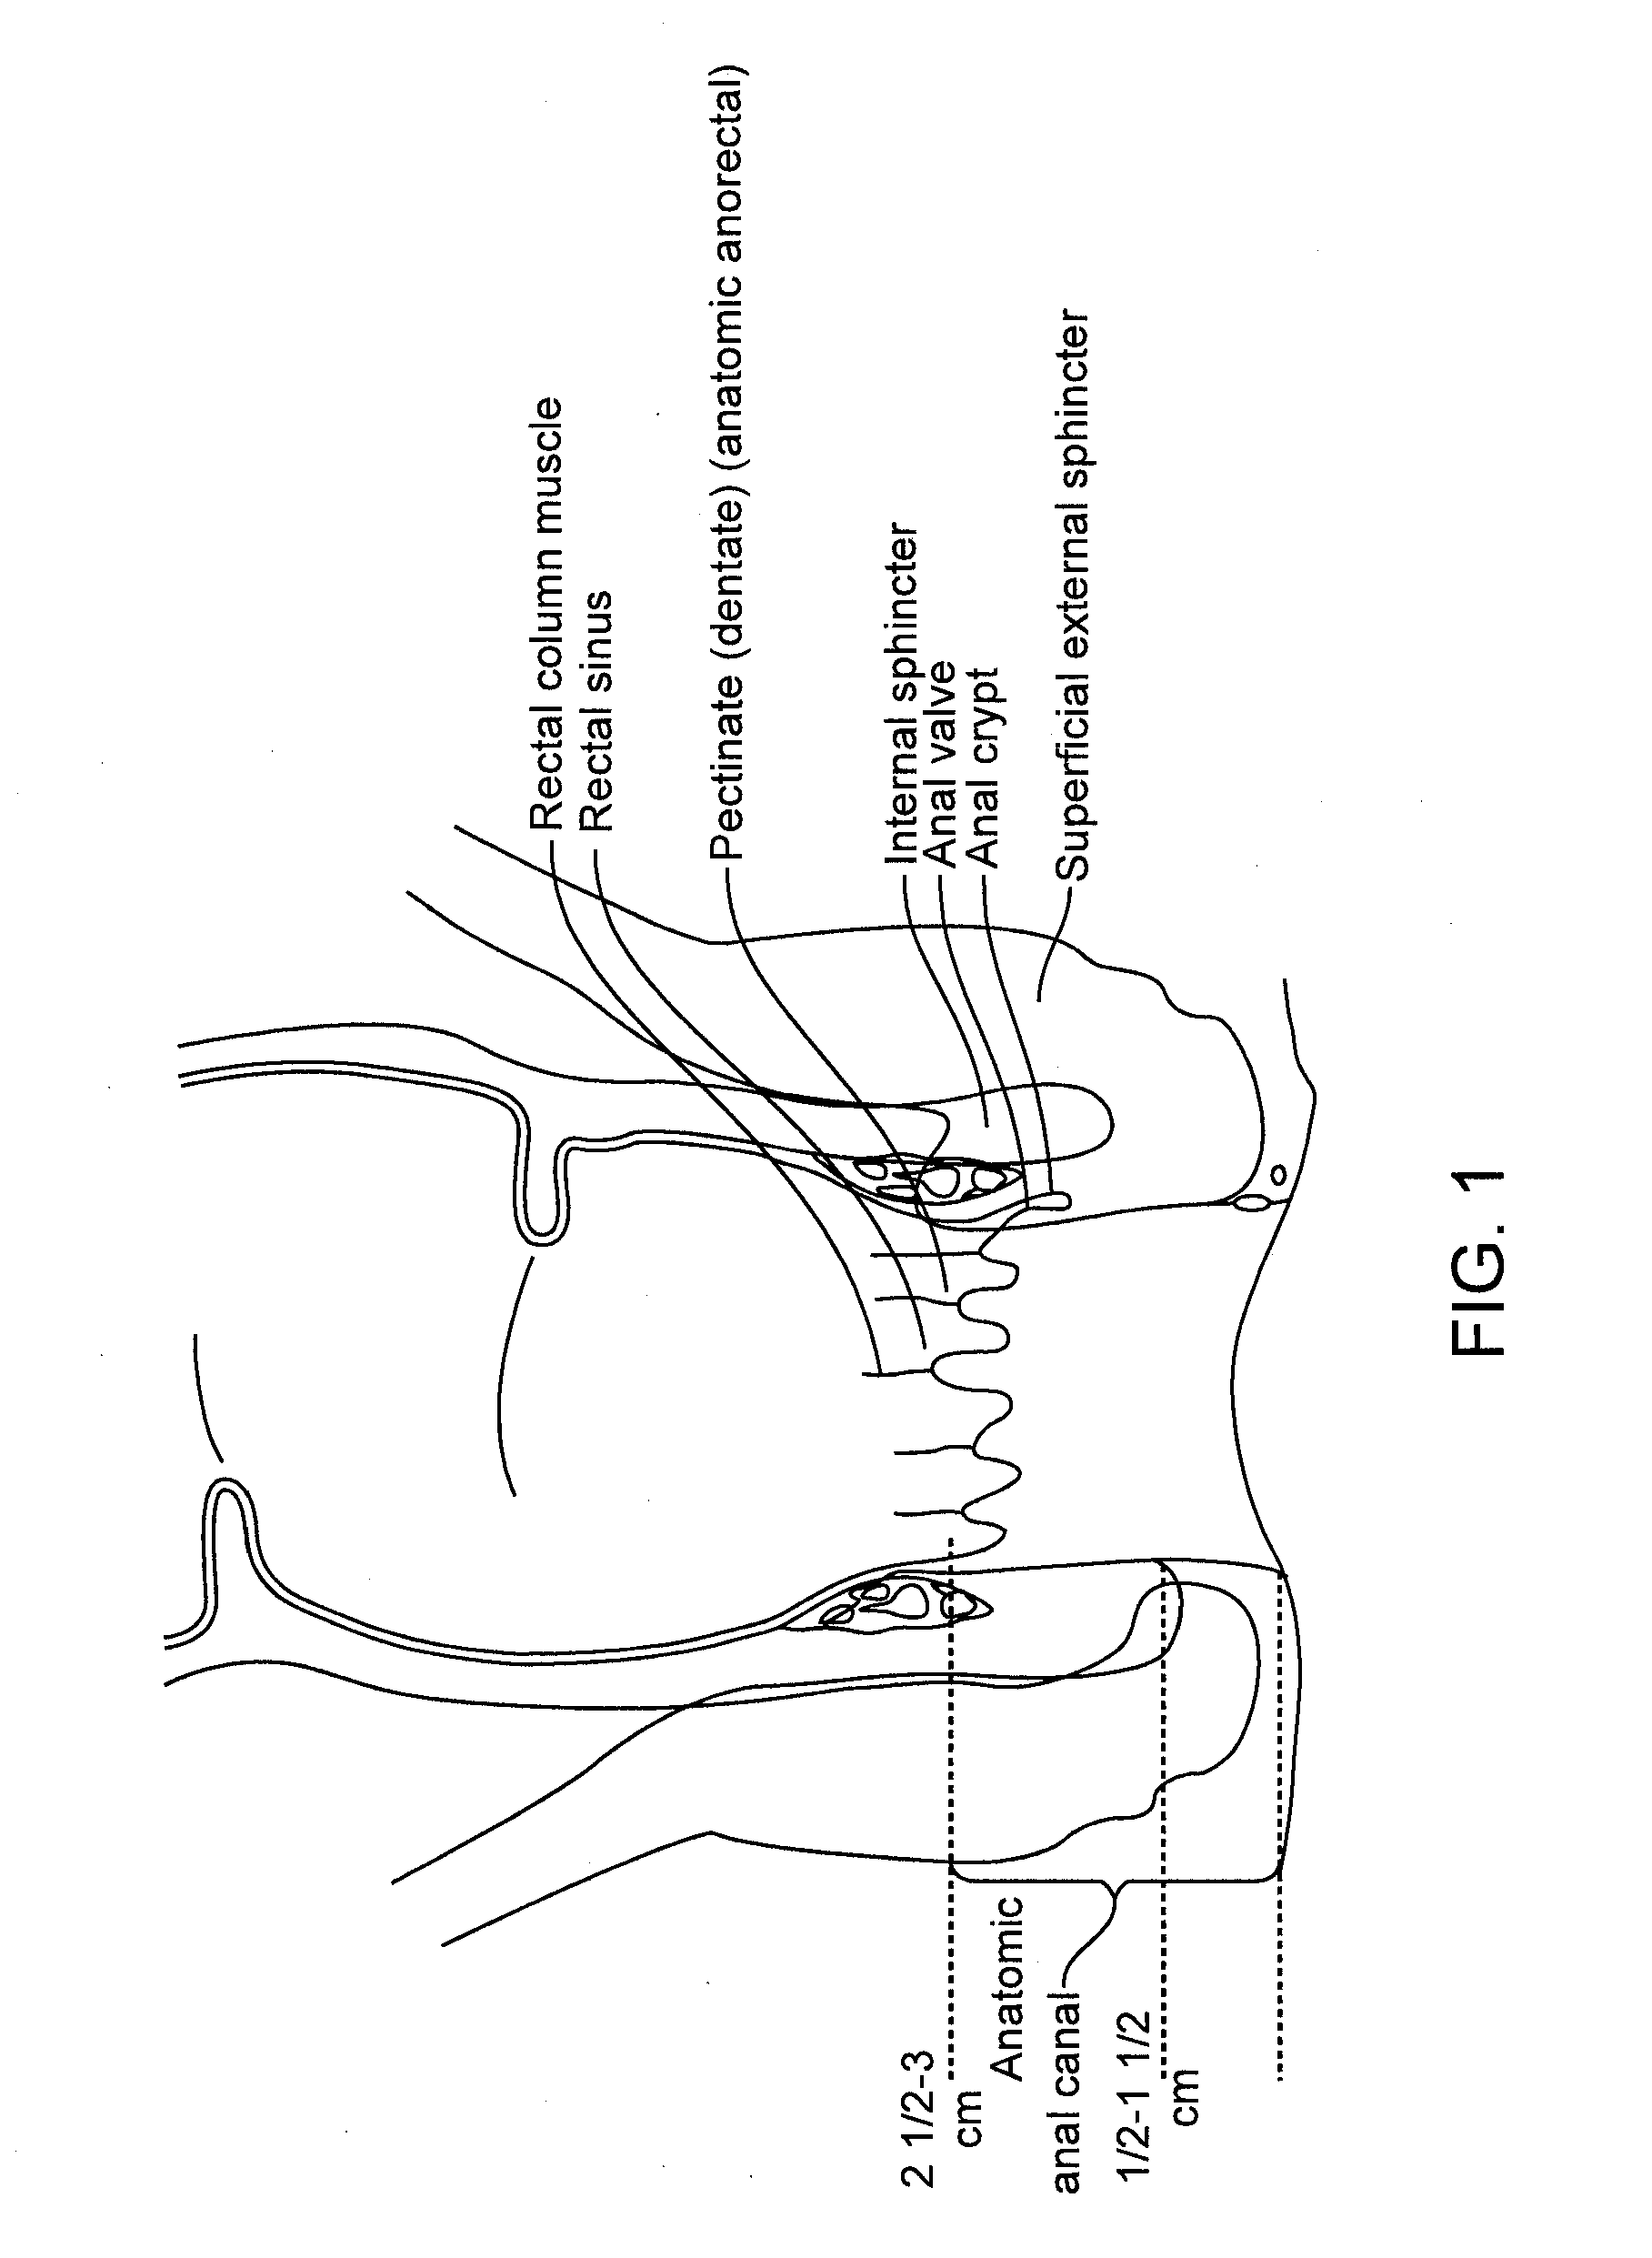 Fecal incontinence device, system and method